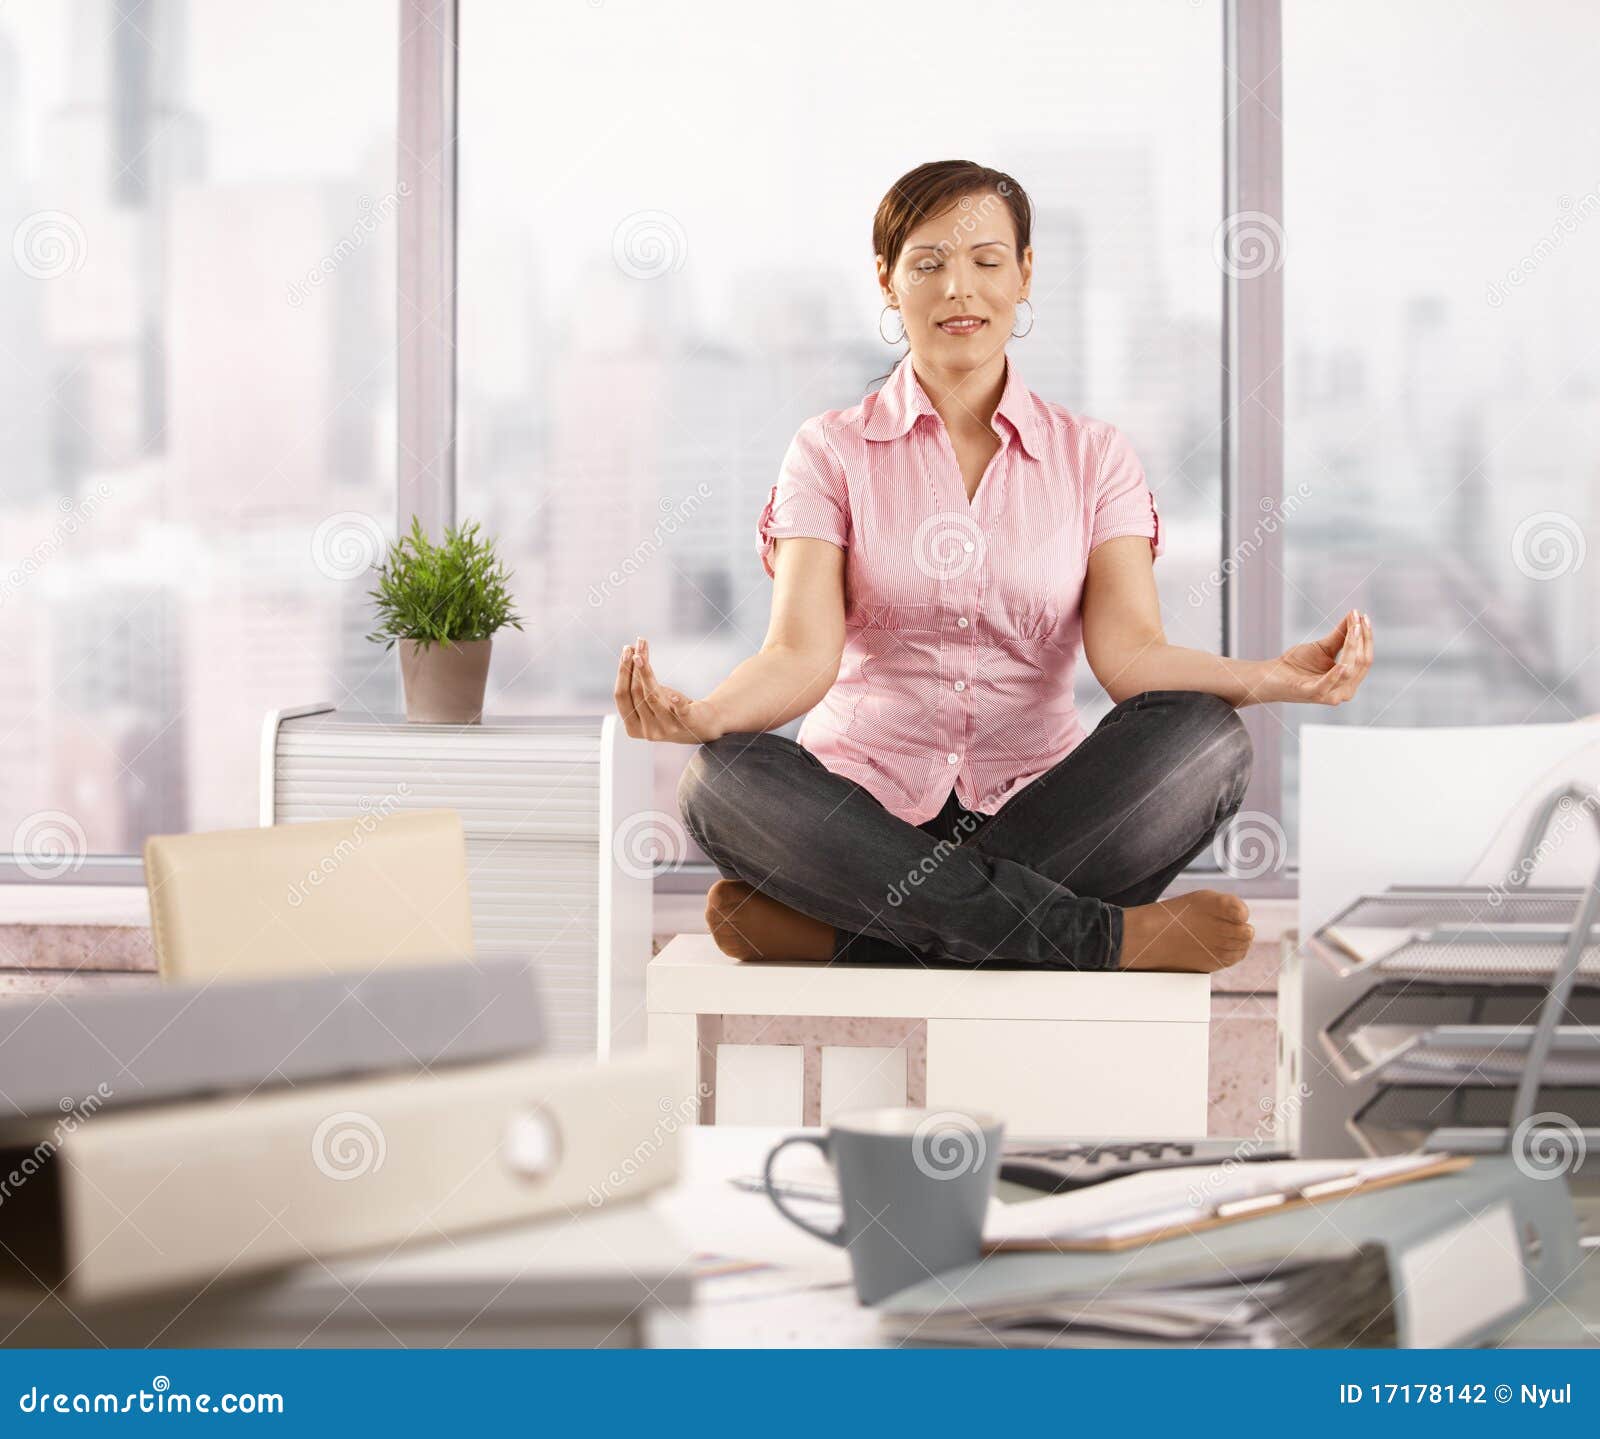 relaxed office worker doing yoga